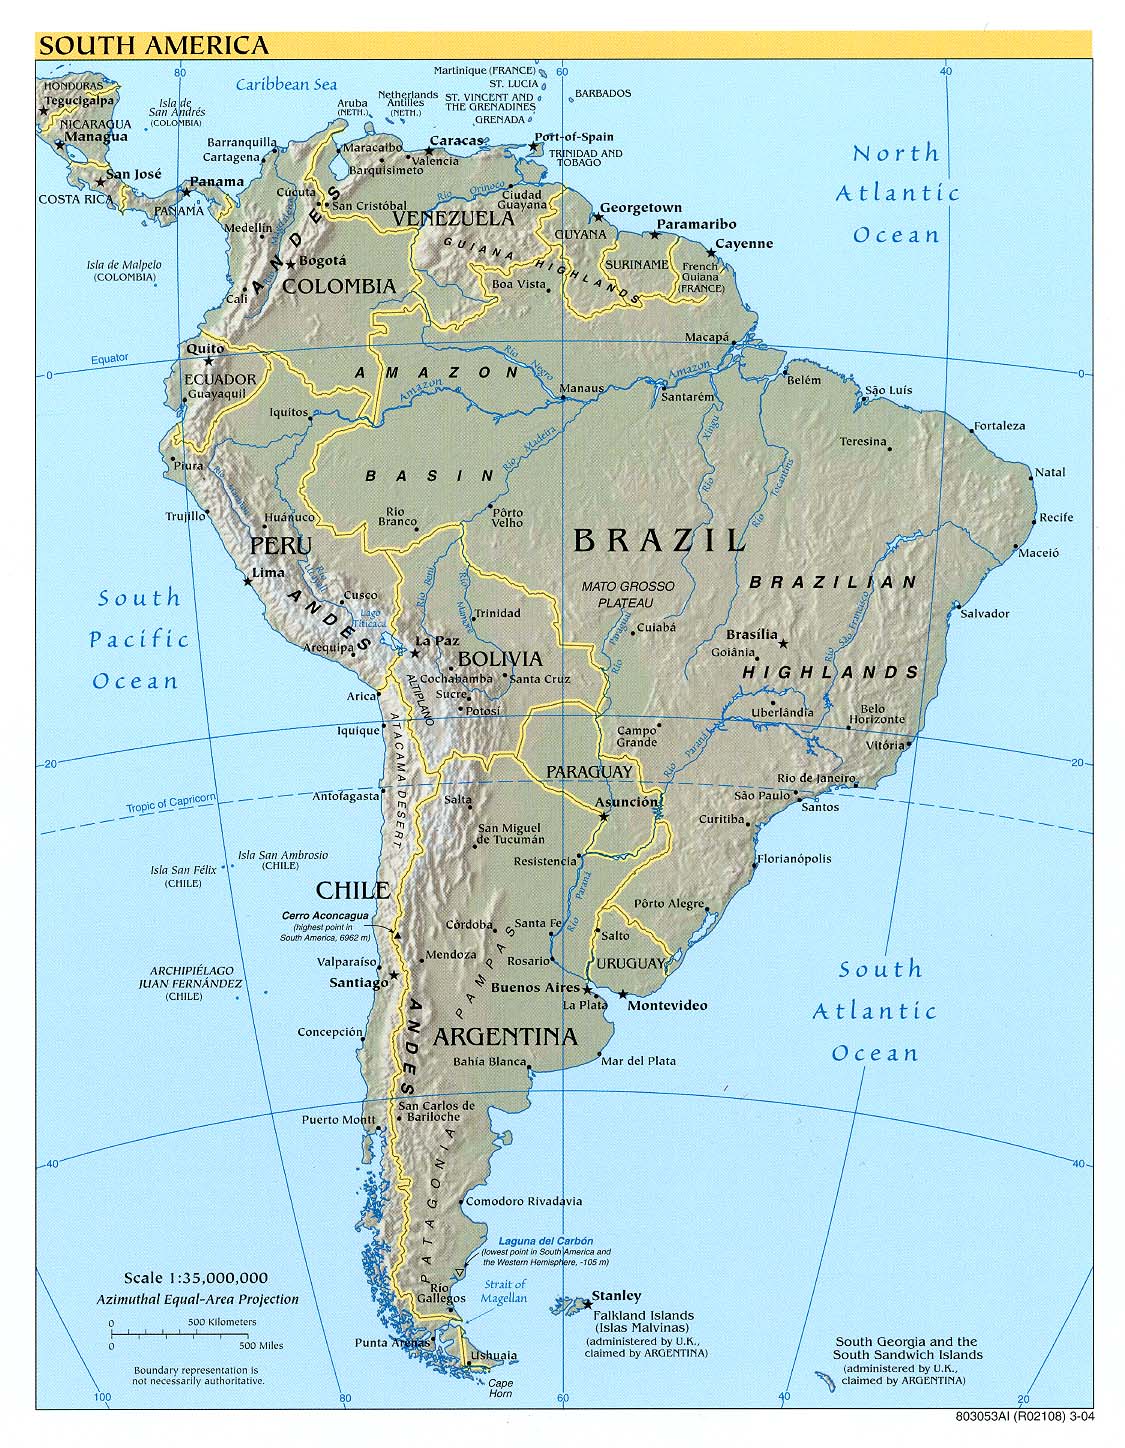 File:Map of South America.jpg - Wikimedia Commons